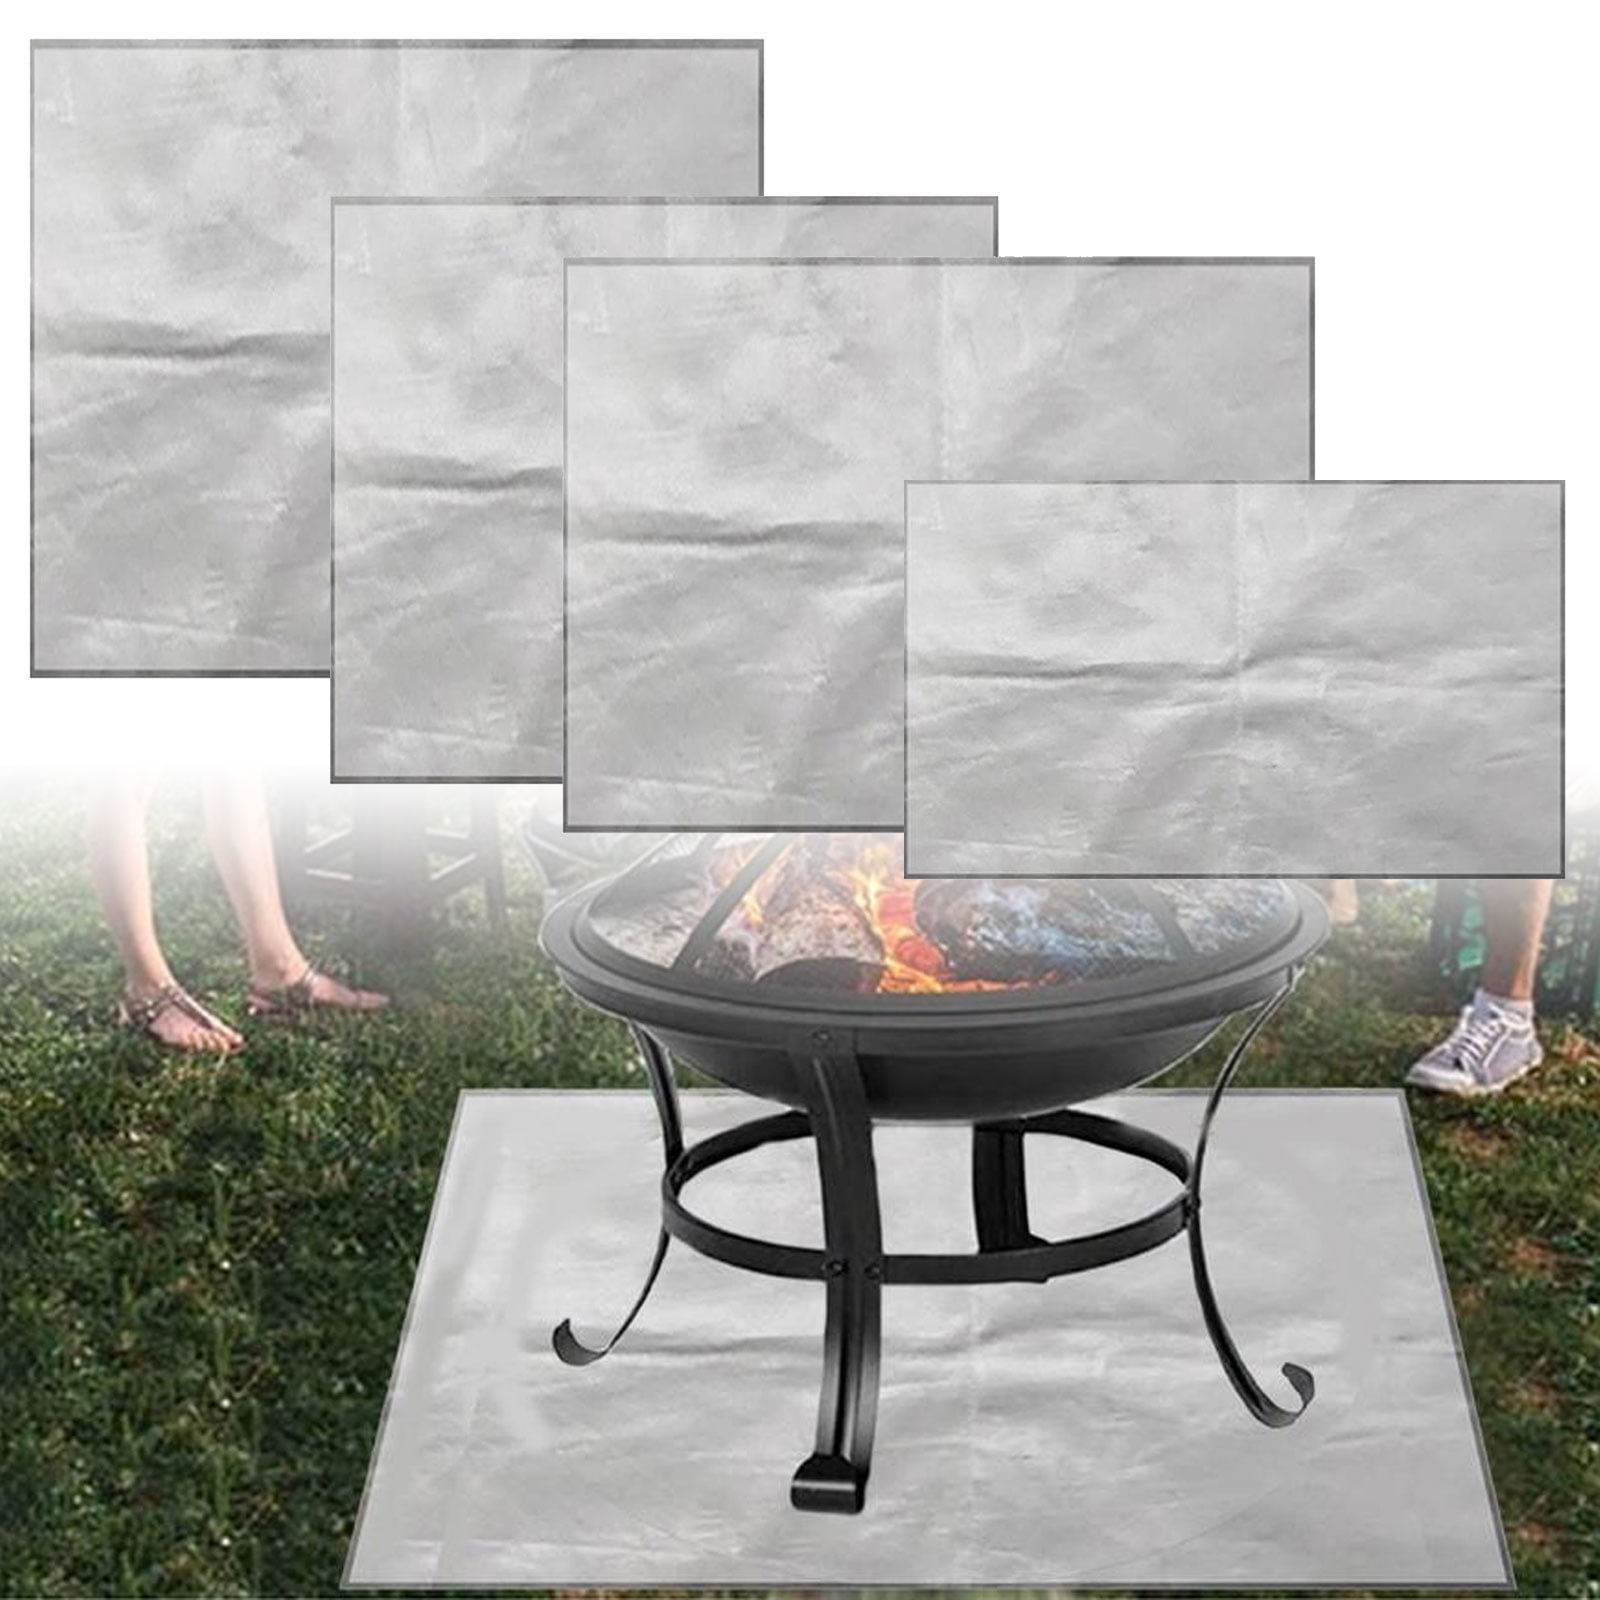 Fireproof Mat for Fire Pit for Wood Burner 46X35cm/60X53cm/100.5X60cm Picnic Barbecue Heat Insulation Pad Flame Retardant and High Temperature Resistant Silicone Coated Fiberglass Fire Blanket